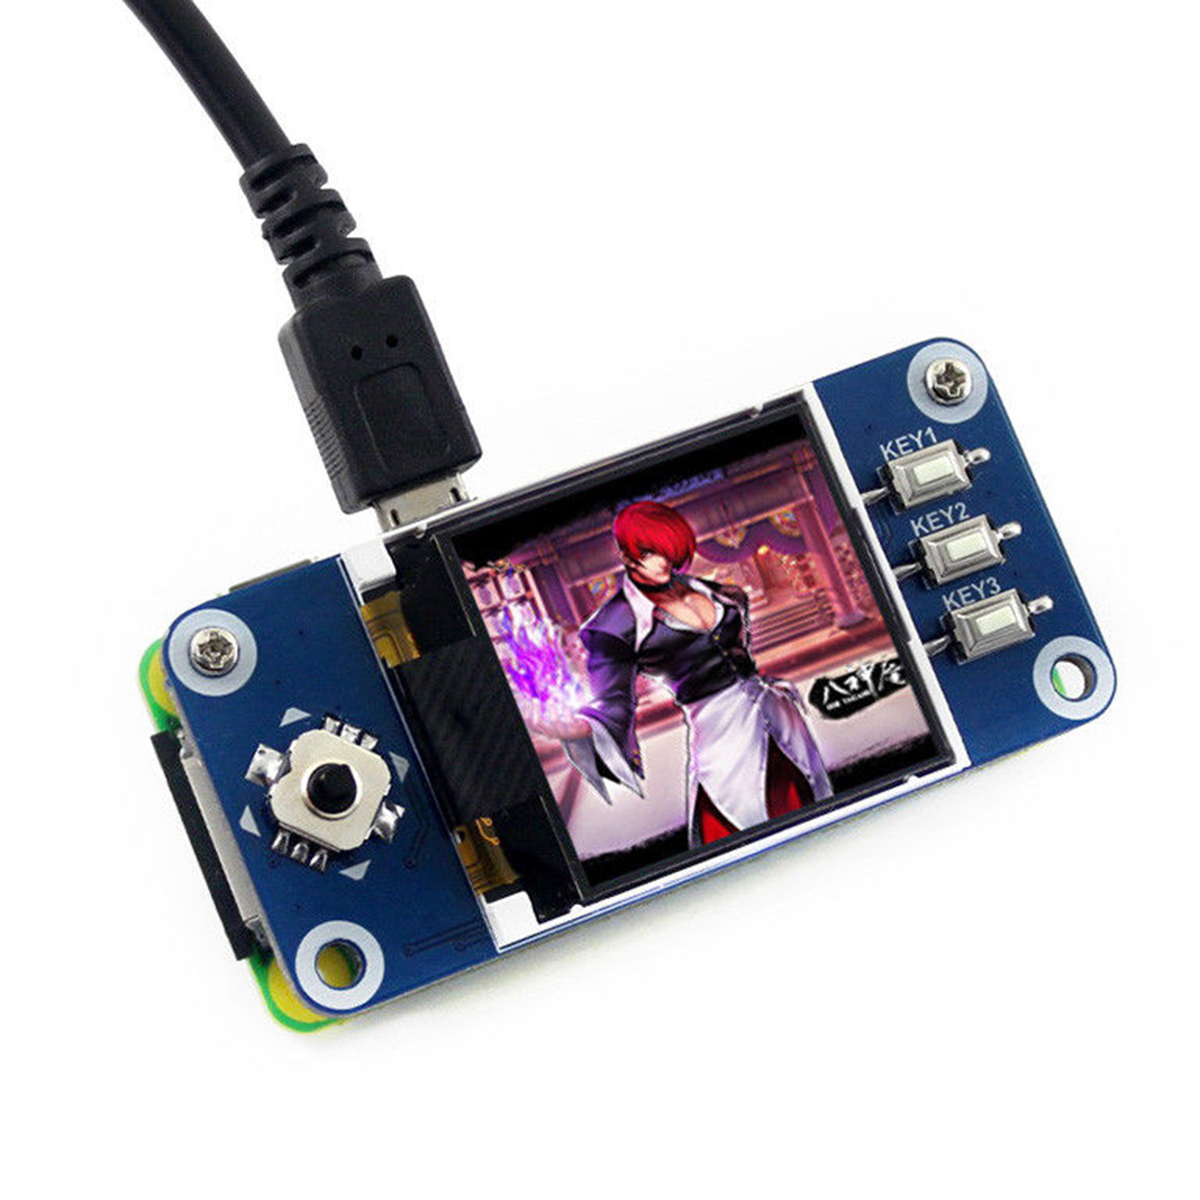 144Inch-128x128-Pixels-SPI-Interface-LCD-Display-HAT-for-Raspberry-Pi-1285050